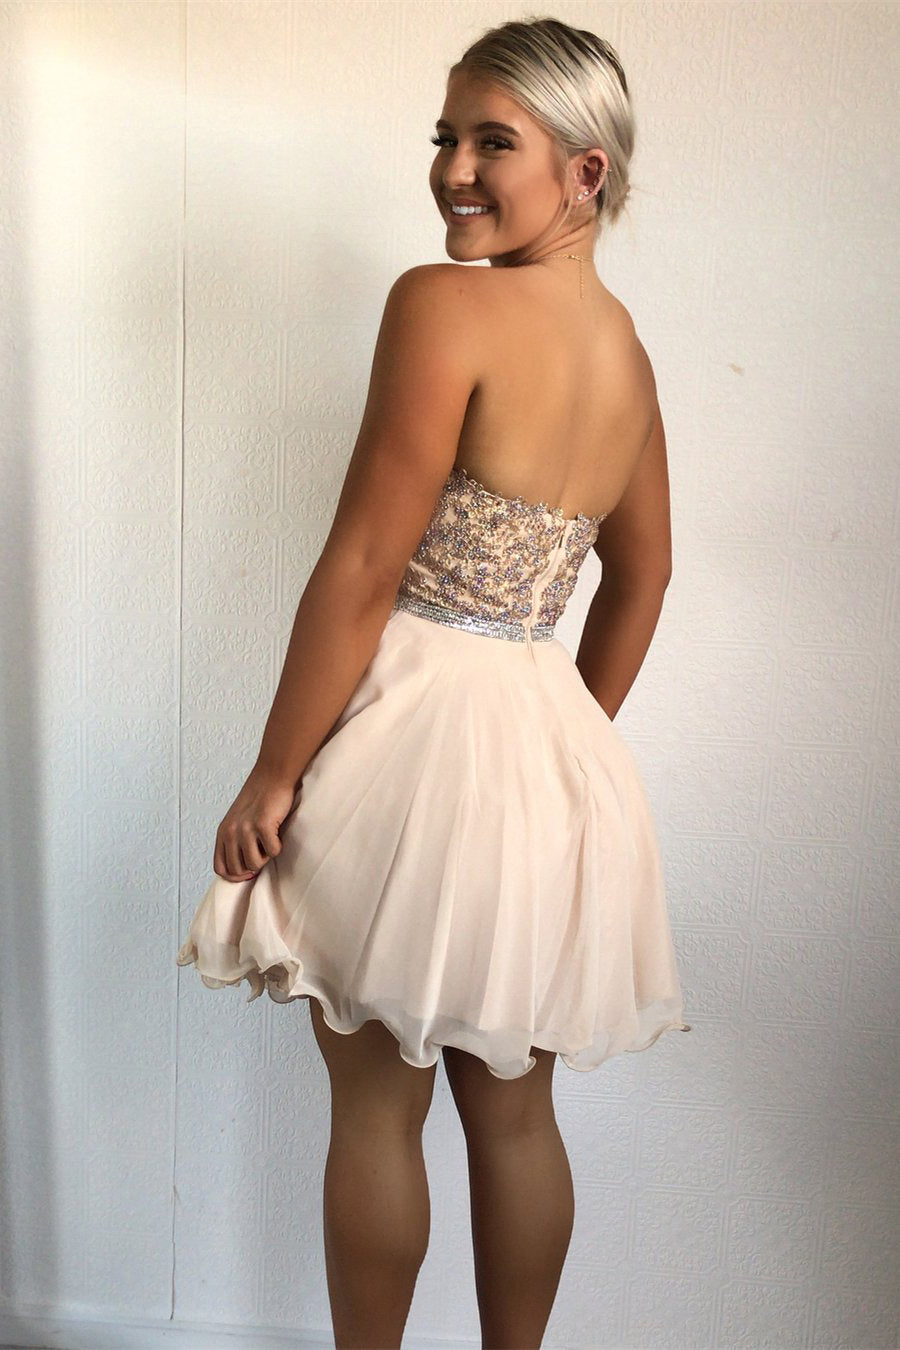 Strapless Lucy A Line Chiffon Homecoming Dresses Sweetheart Rhinestone Beaded Pleated Backless